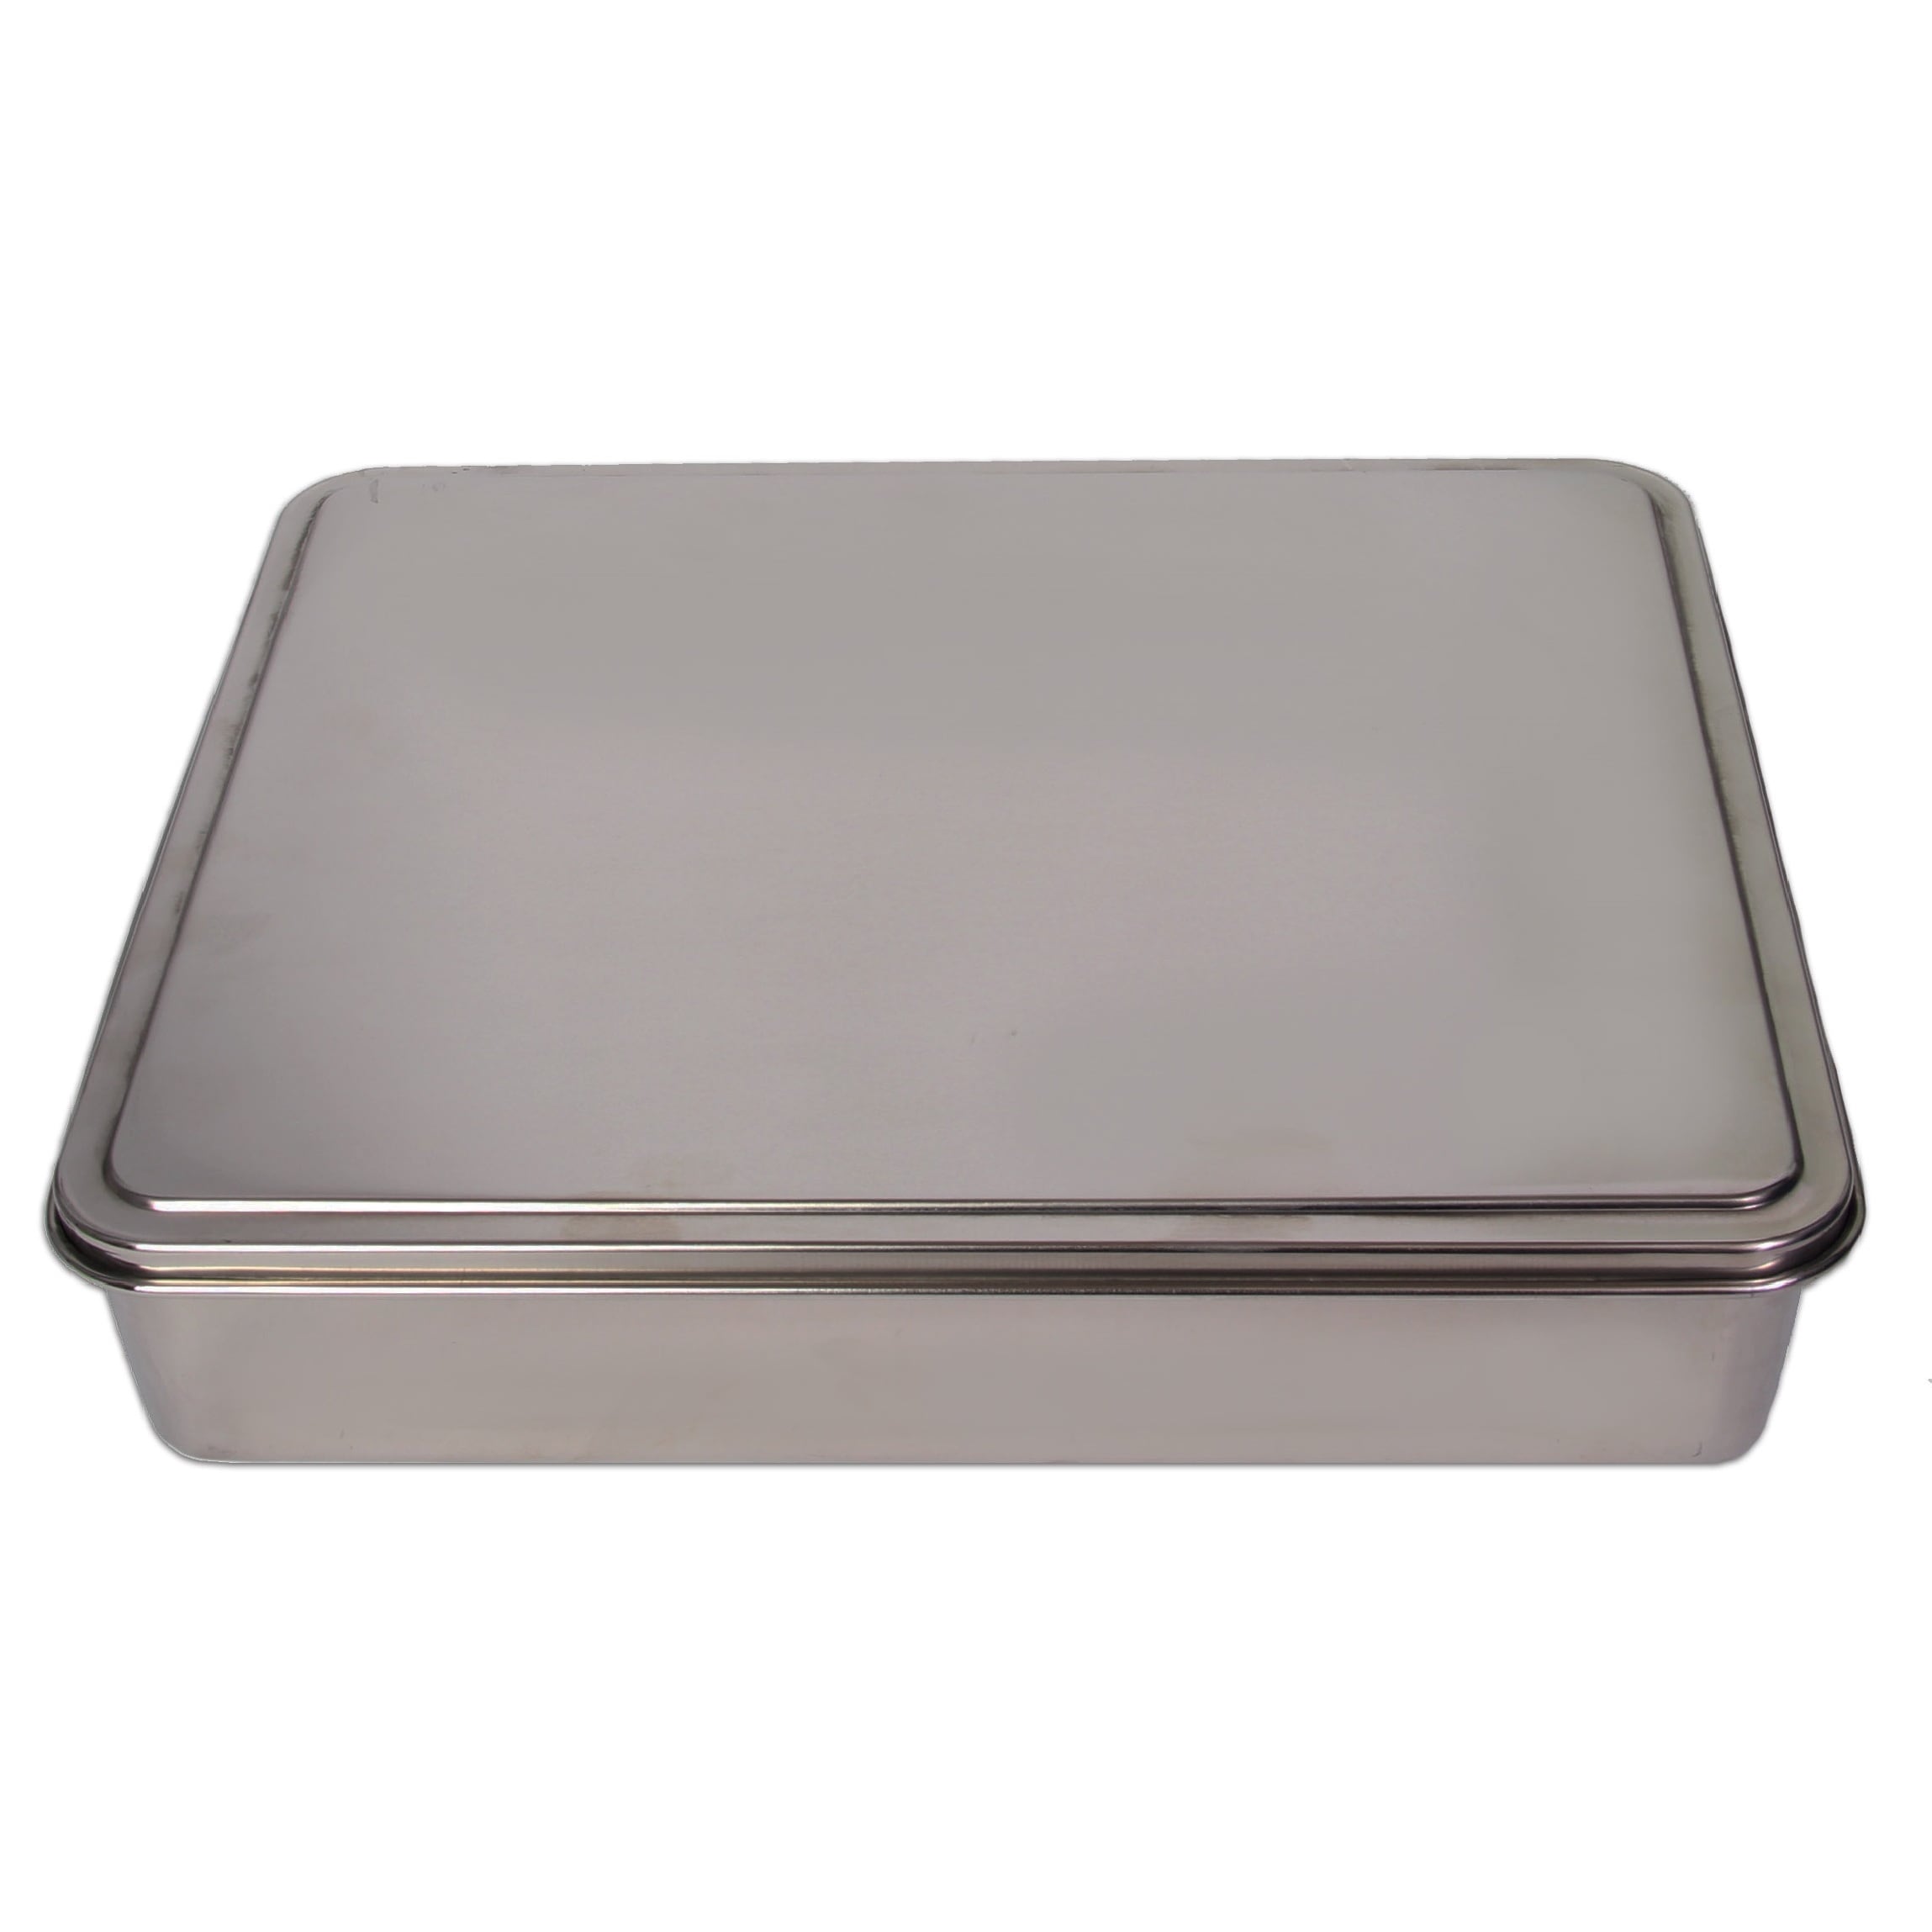 https://ak1.ostkcdn.com/images/products/12407091/YBM-Home-Stainless-Steel-9-inch-Covered-Cake-Pan-9c0e63ee-0be9-4e85-b9d9-53839079028d.jpg